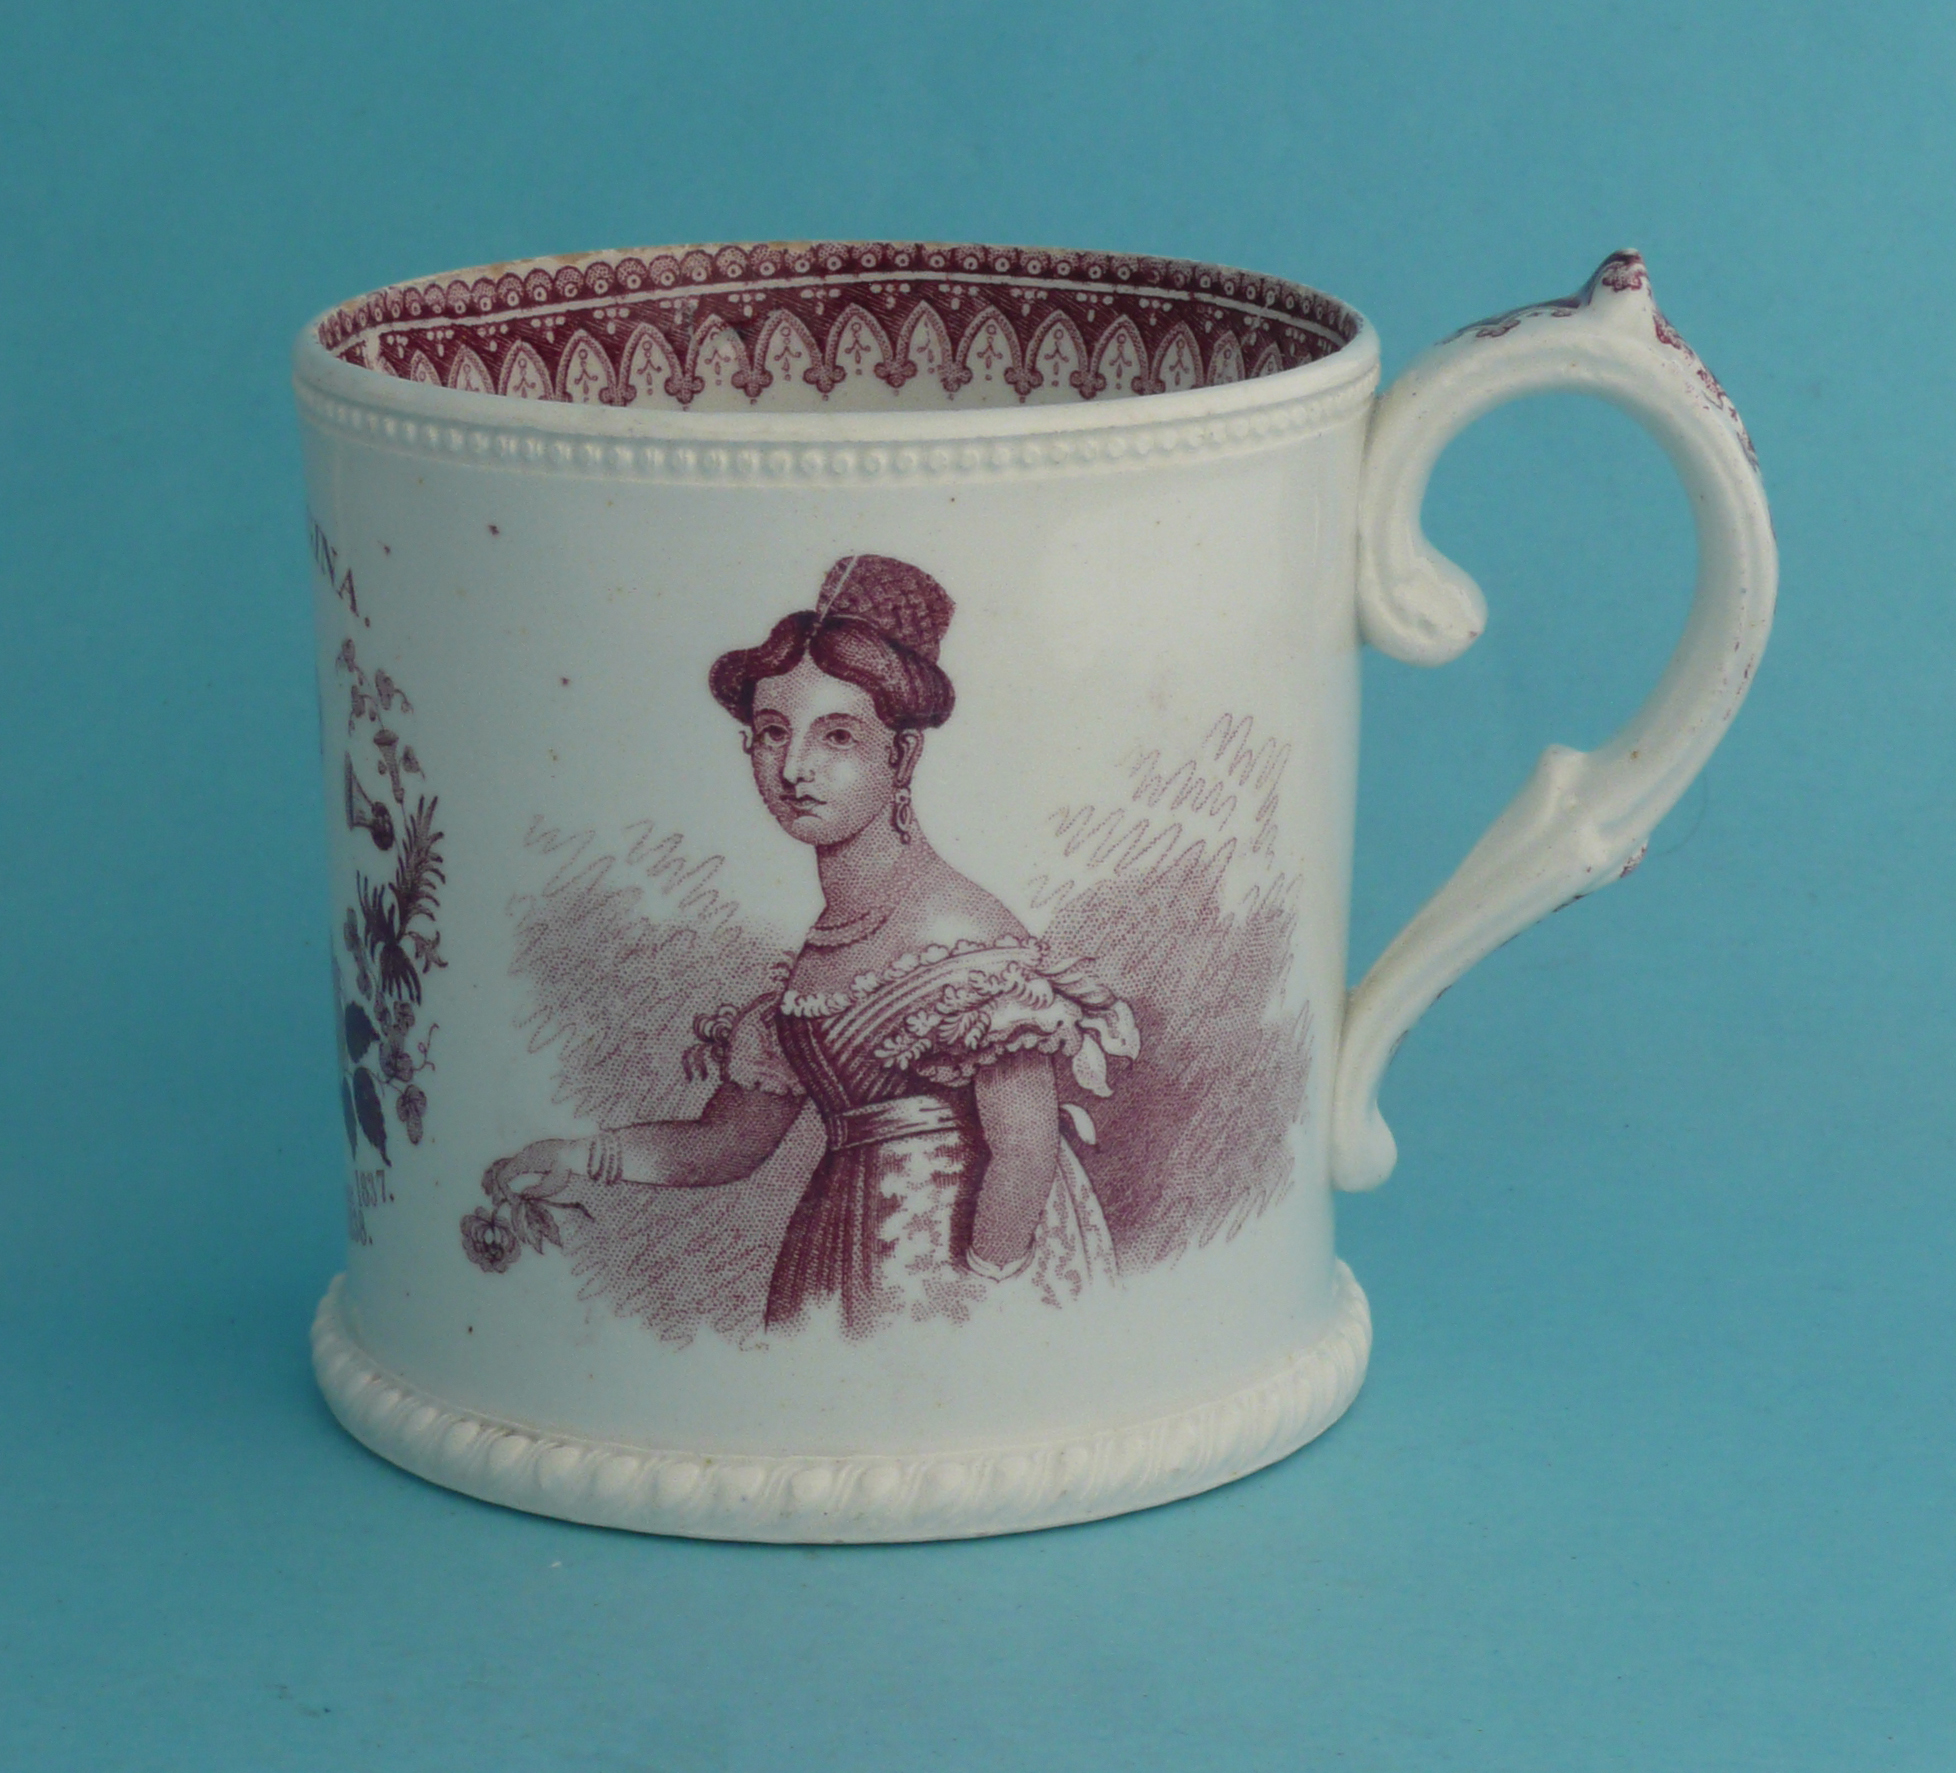 1838 Coronation: a cylindrical pearlware mug by Read & Clementson printed in pink with portraits